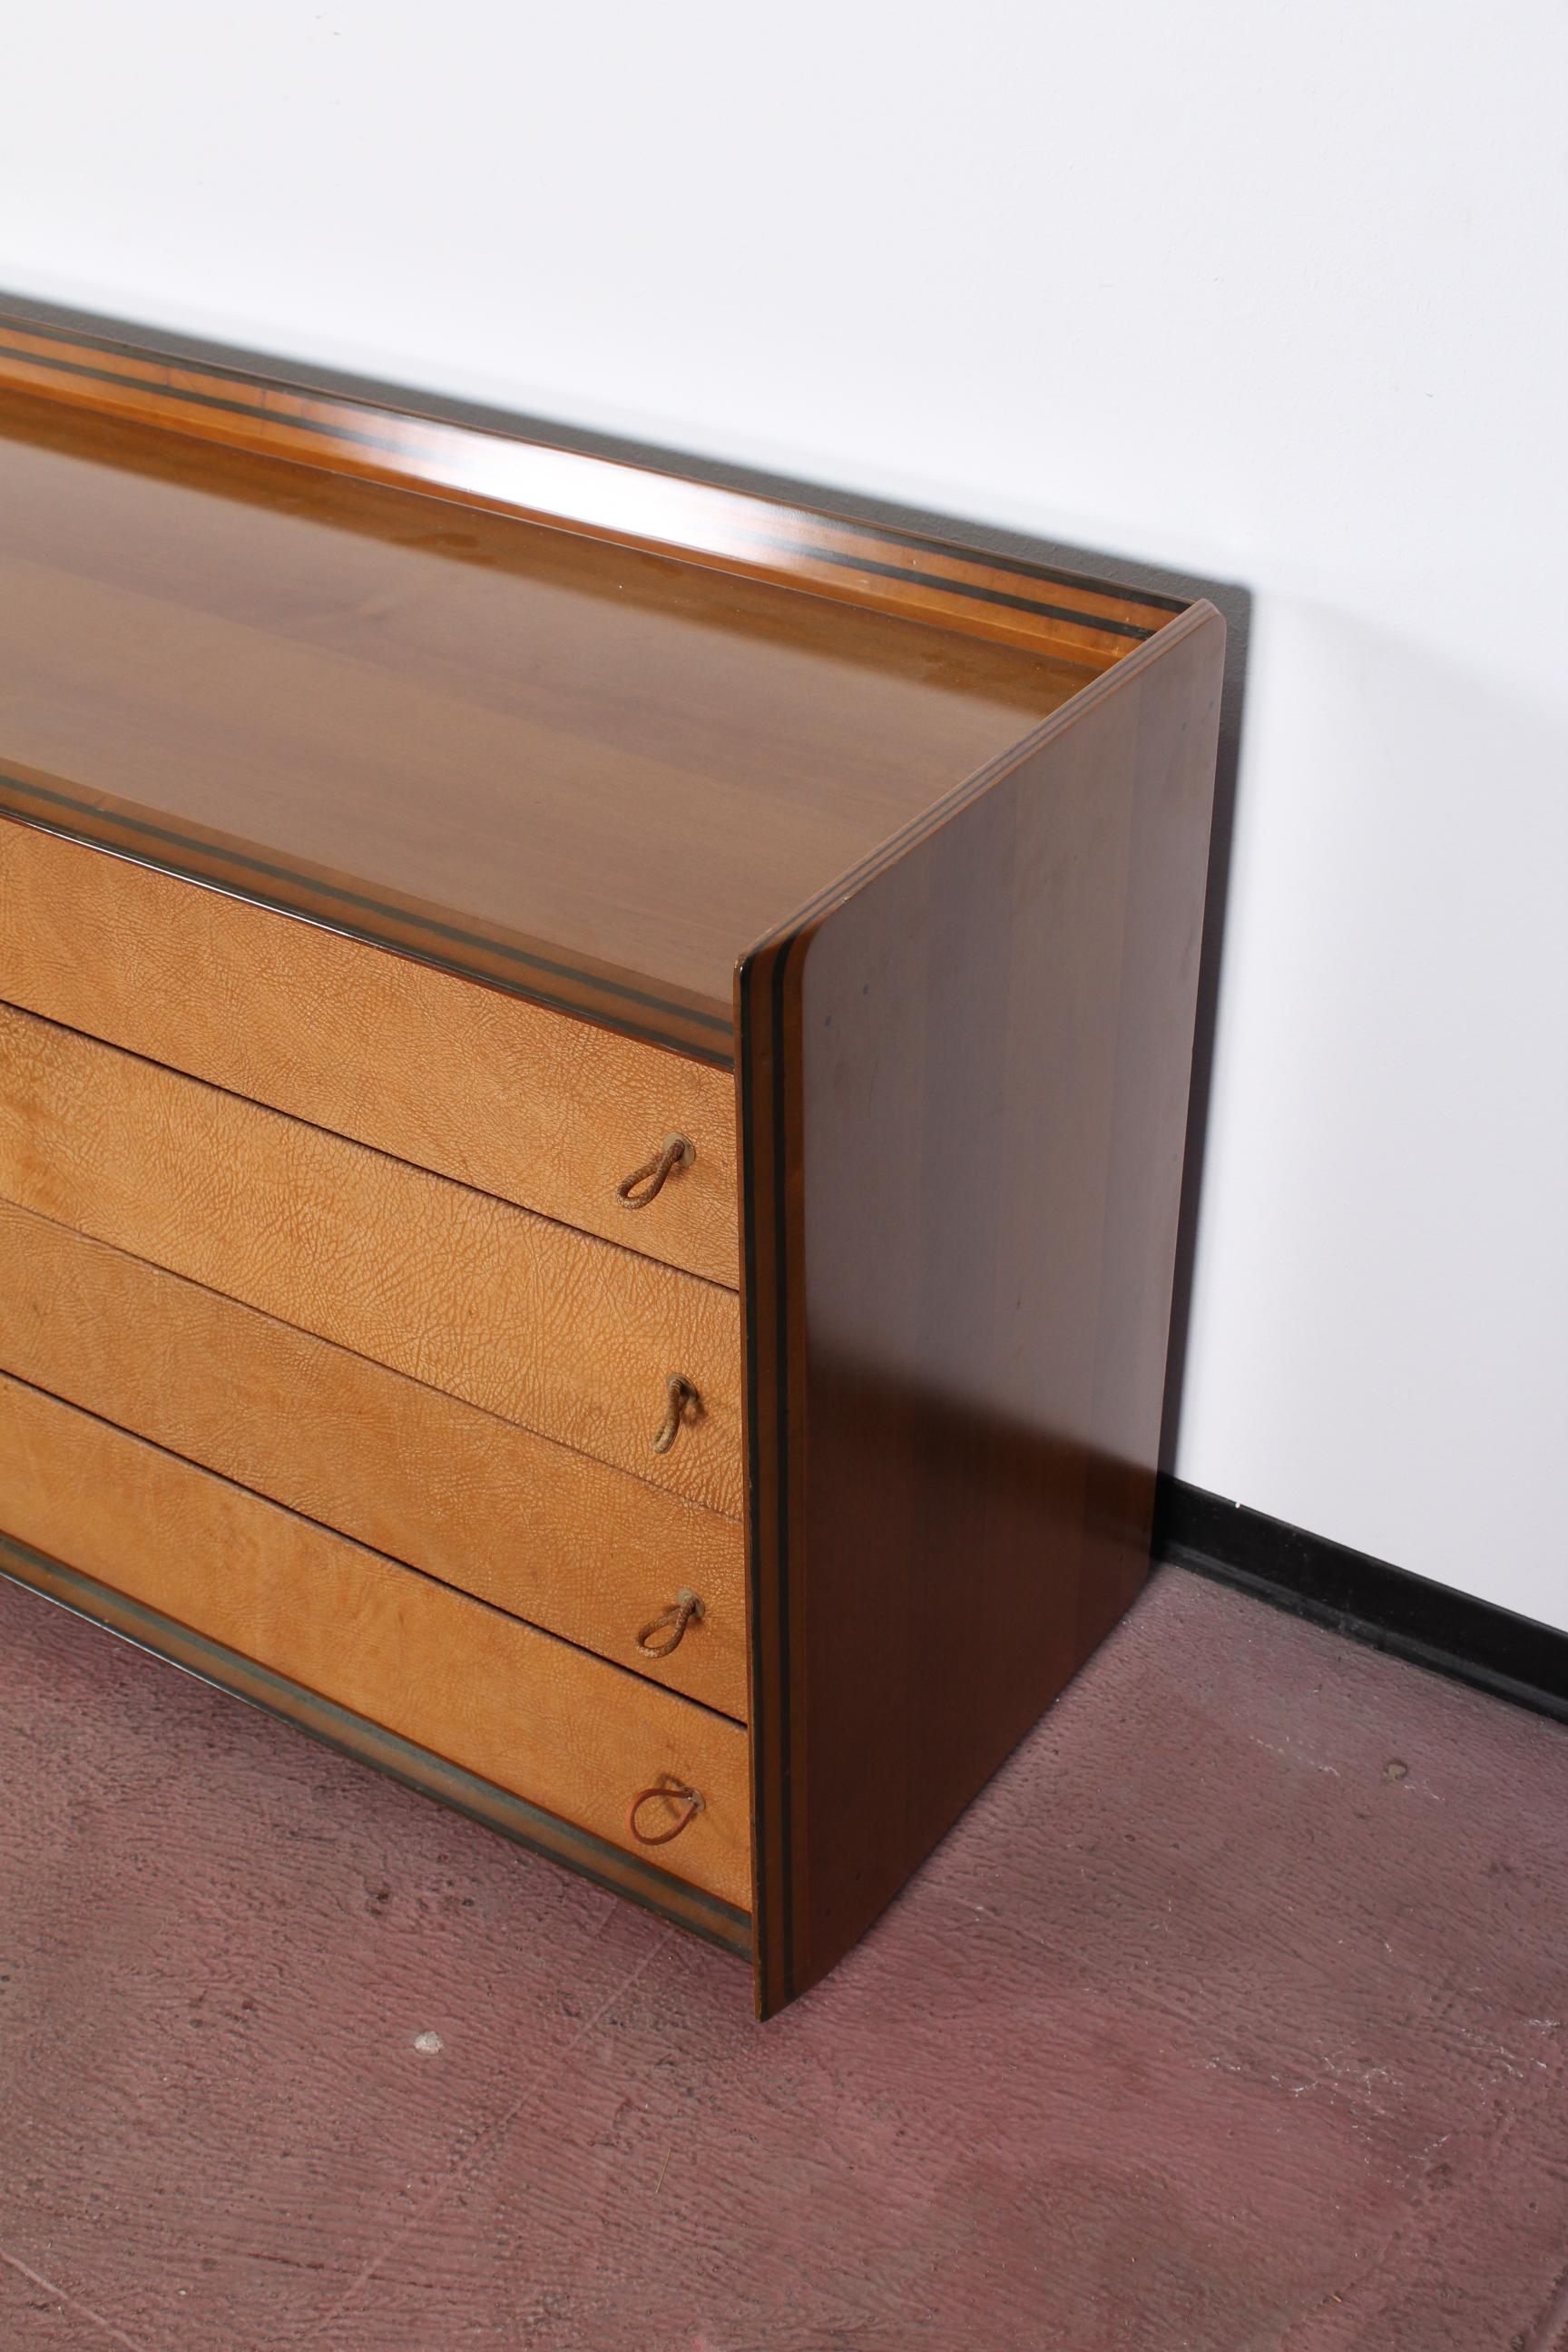 Model Artona drawer cabinet, in wallnut and leather, designed By Afra & Tobia Scarpa, fdor Maxalto by B&B Italia, Italy, circa 1975.
This eight-drawers dresser was designed during the first period of the Artona collection, it combines the edging in